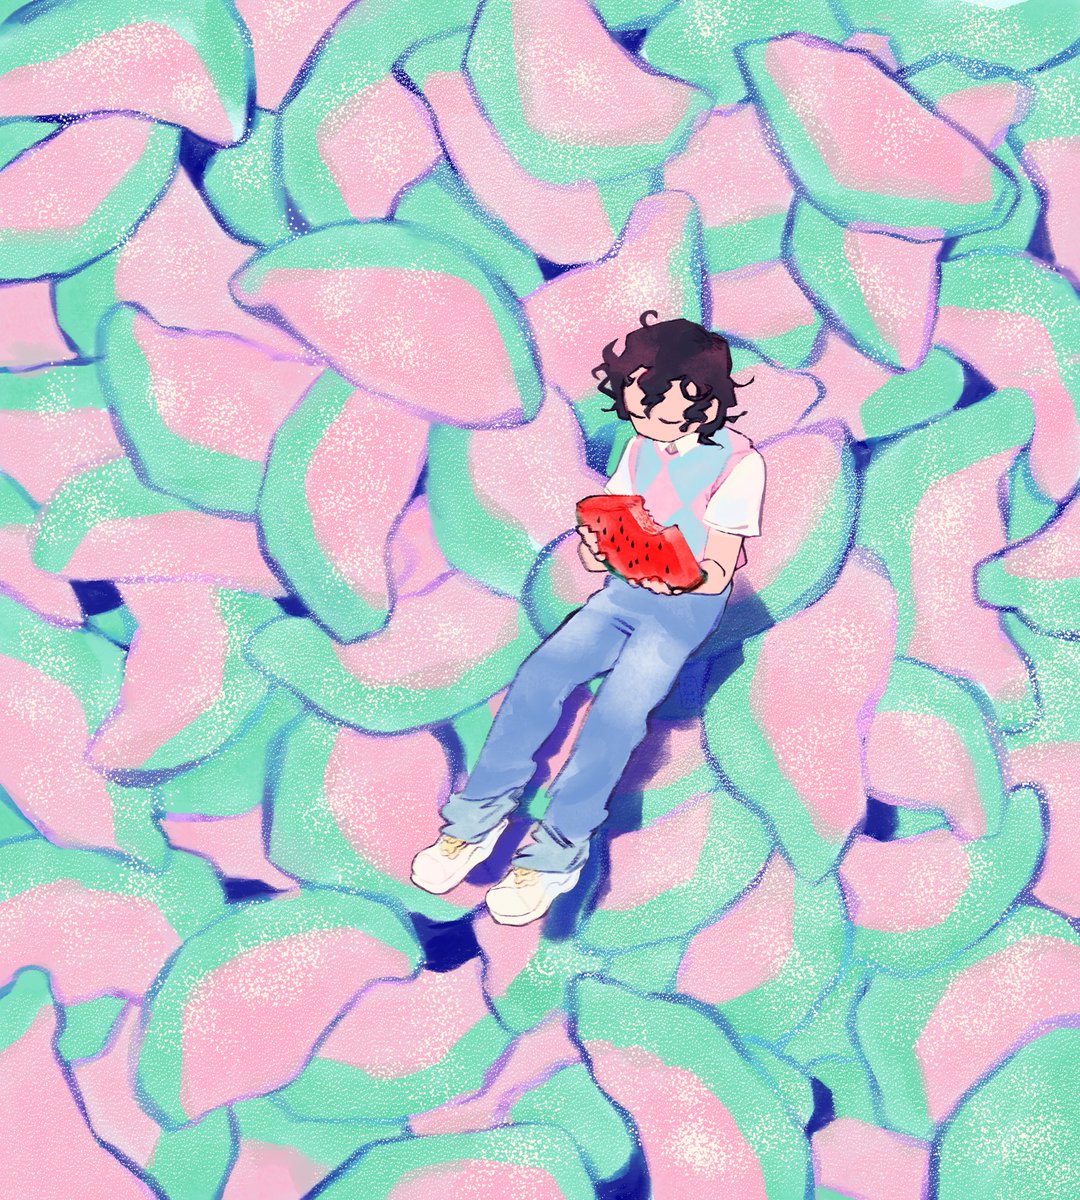 「magtober day 1 - sour candy 」|hikaru🍑のイラスト